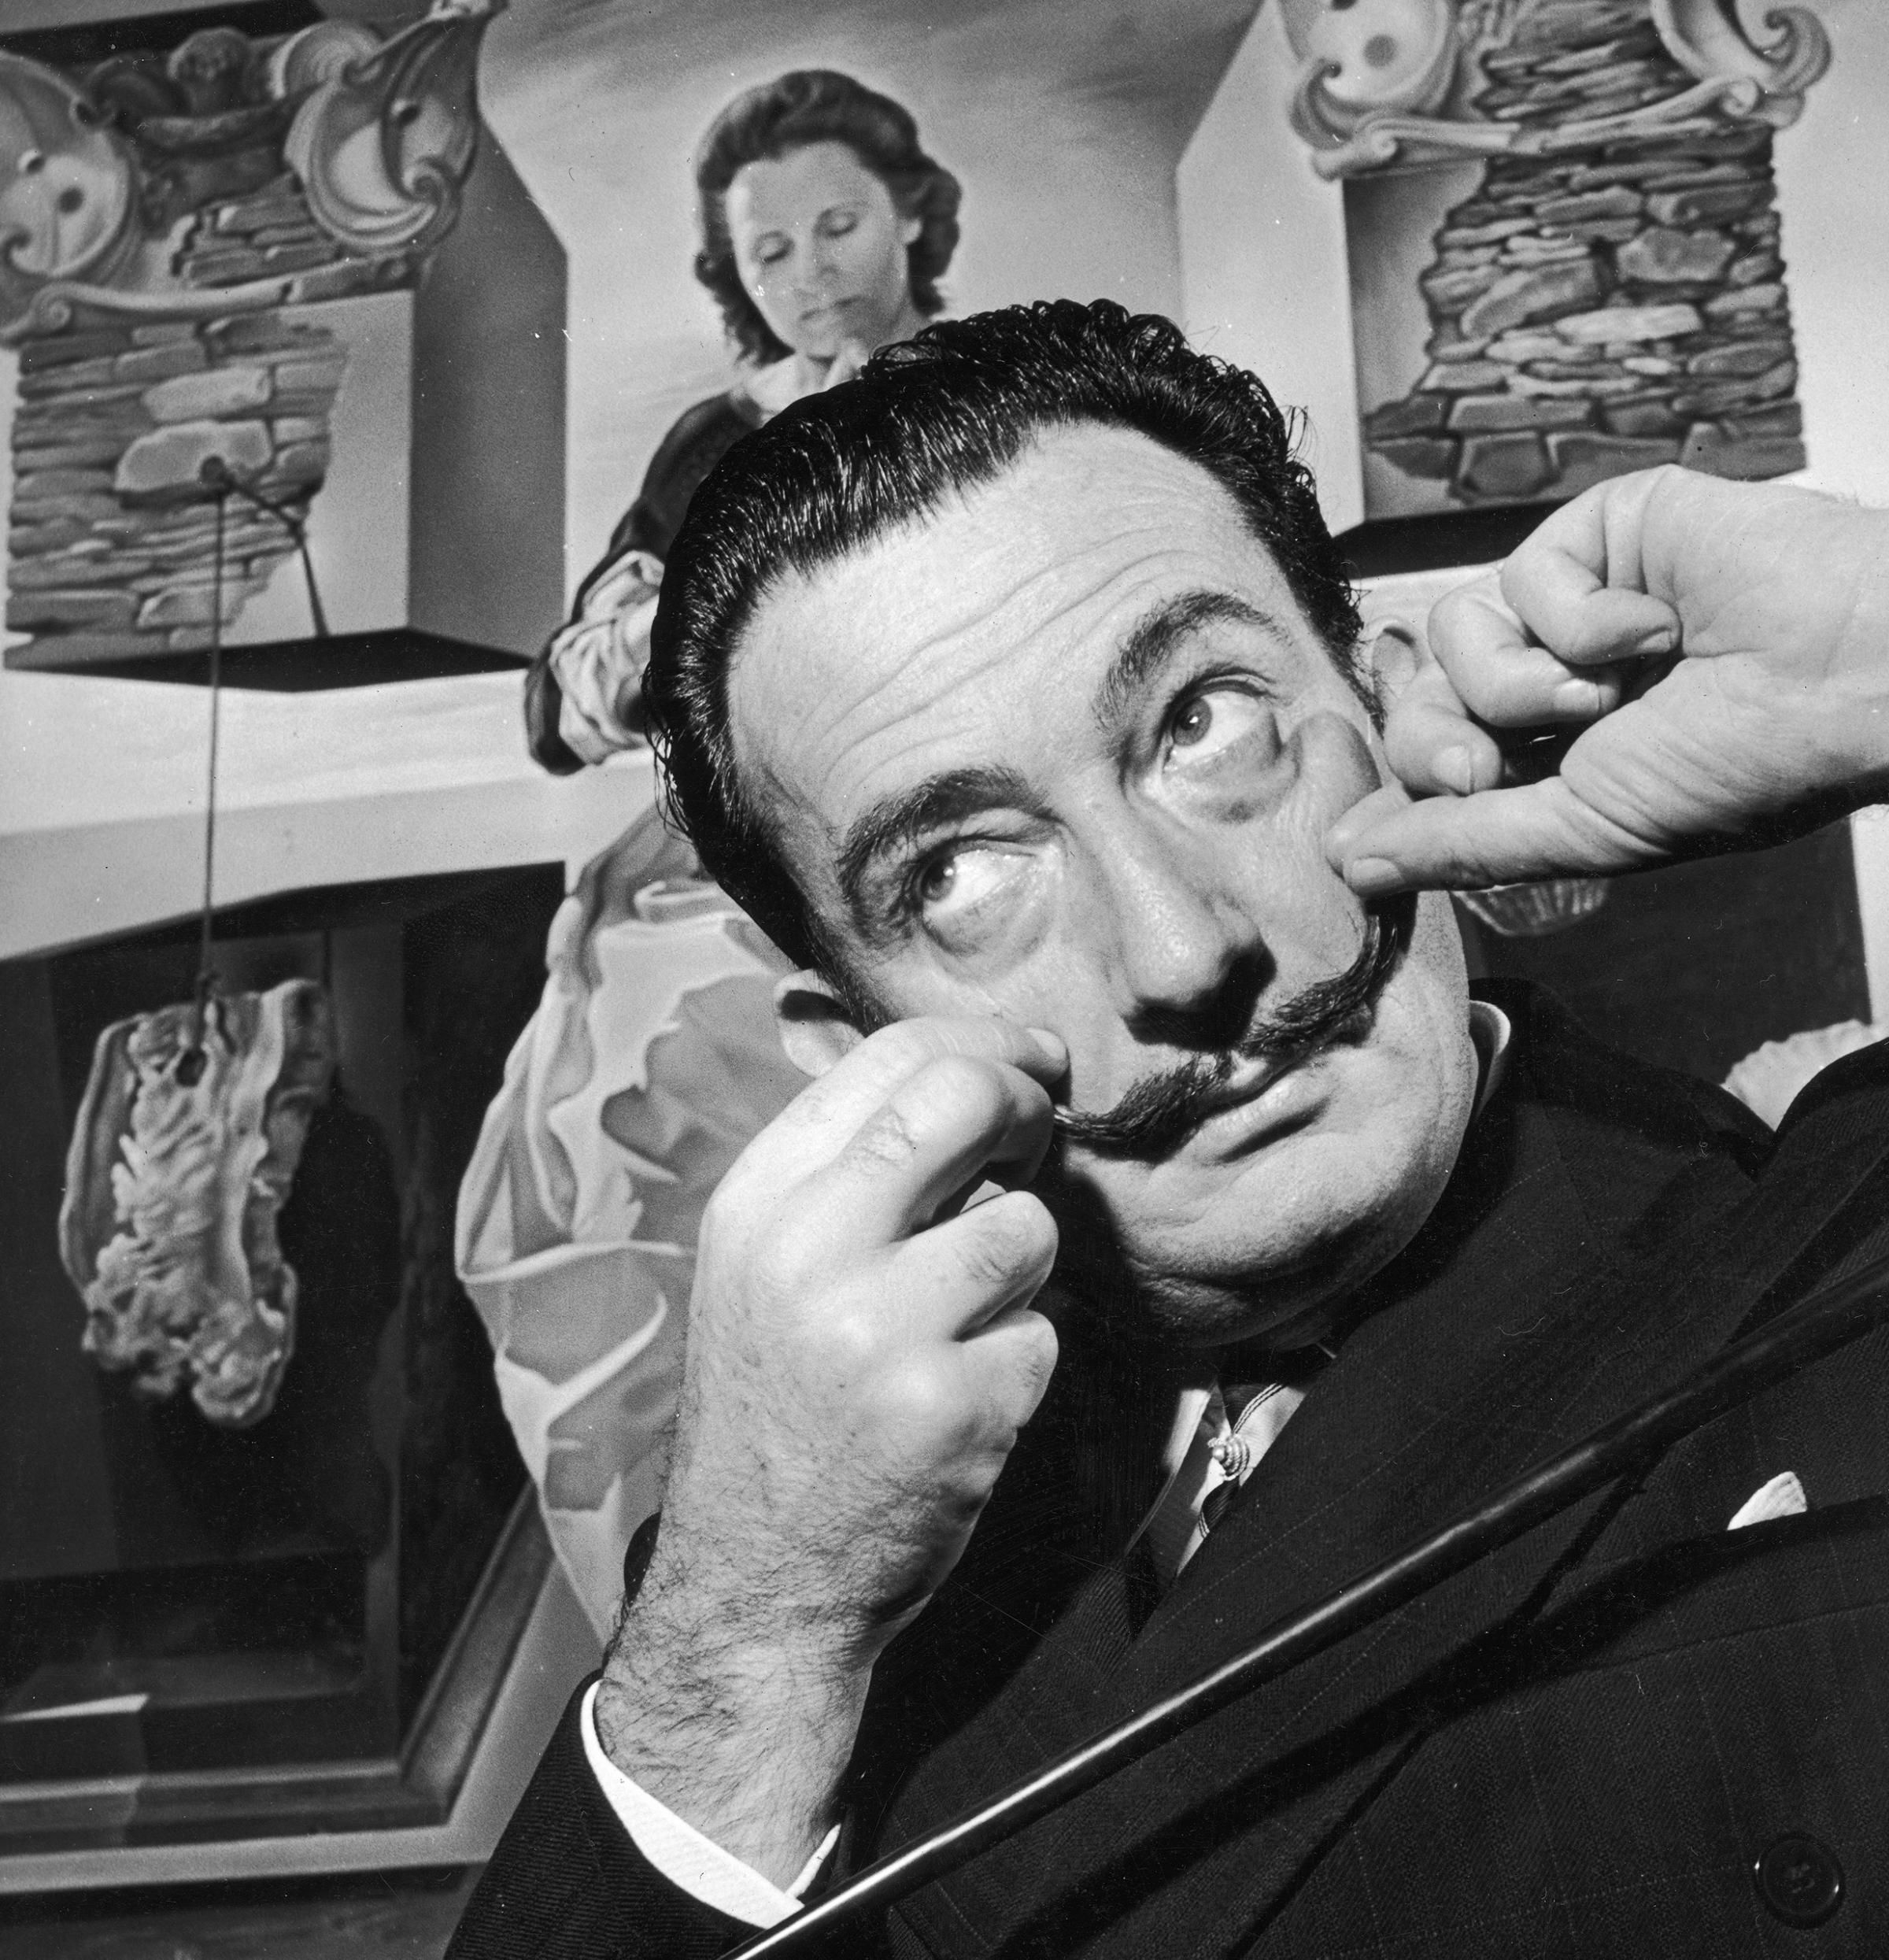 Salvador Dali in London with one of his paintings entitled 'The Madonna of Port Lligat', December 1951.